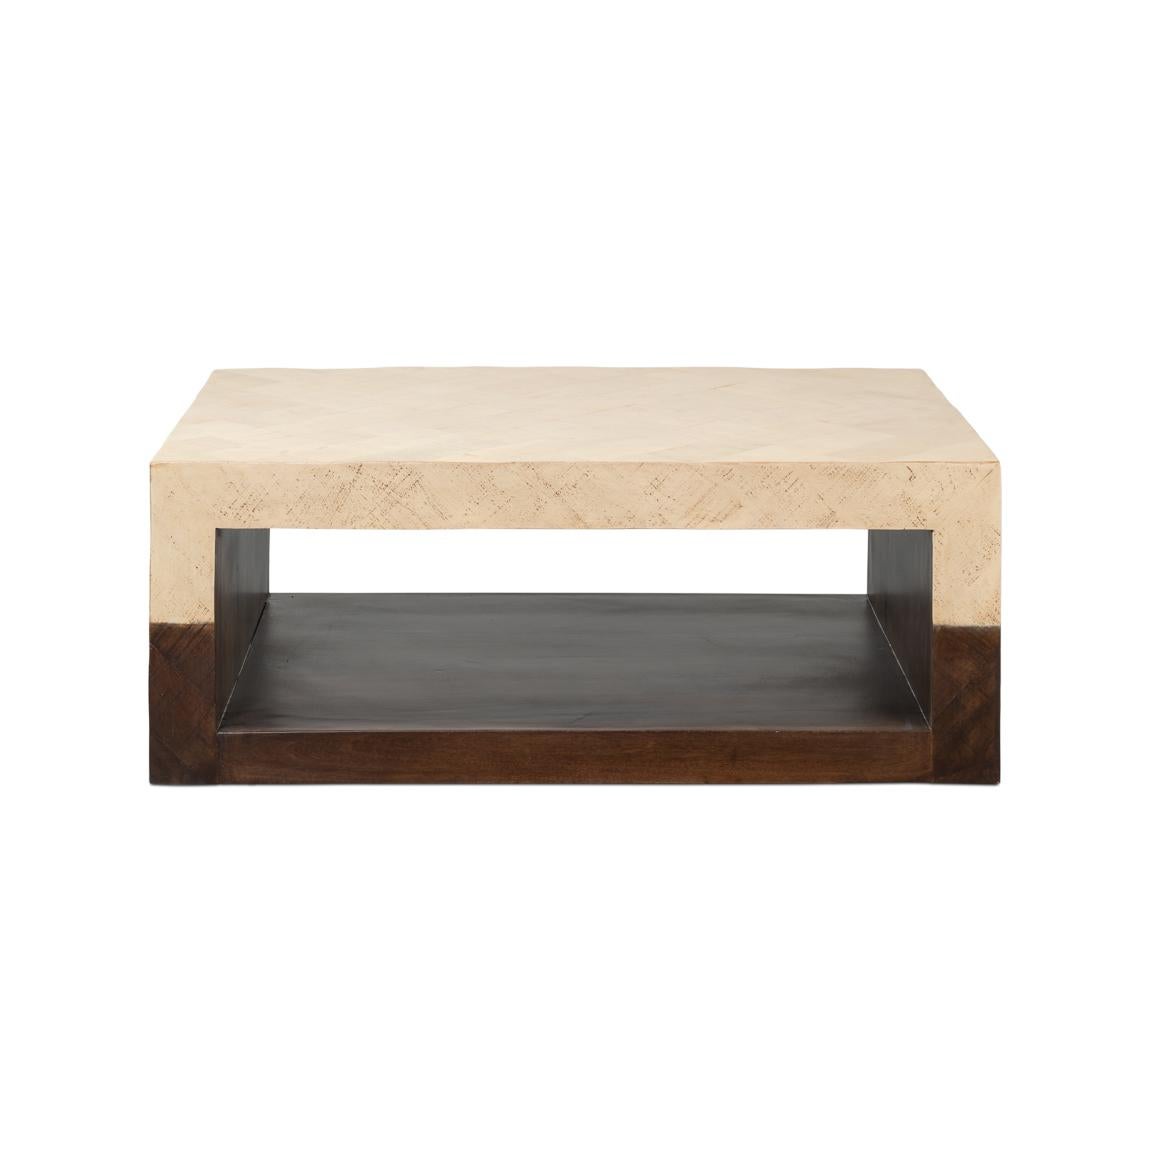 The coffee table emerges as a centerpiece that masterfully unites contrasting shades and intriguing forms. It embodies the essence of contemporary design, injecting a revitalizing slant on modern aesthetics. The distinctive geometric interplay